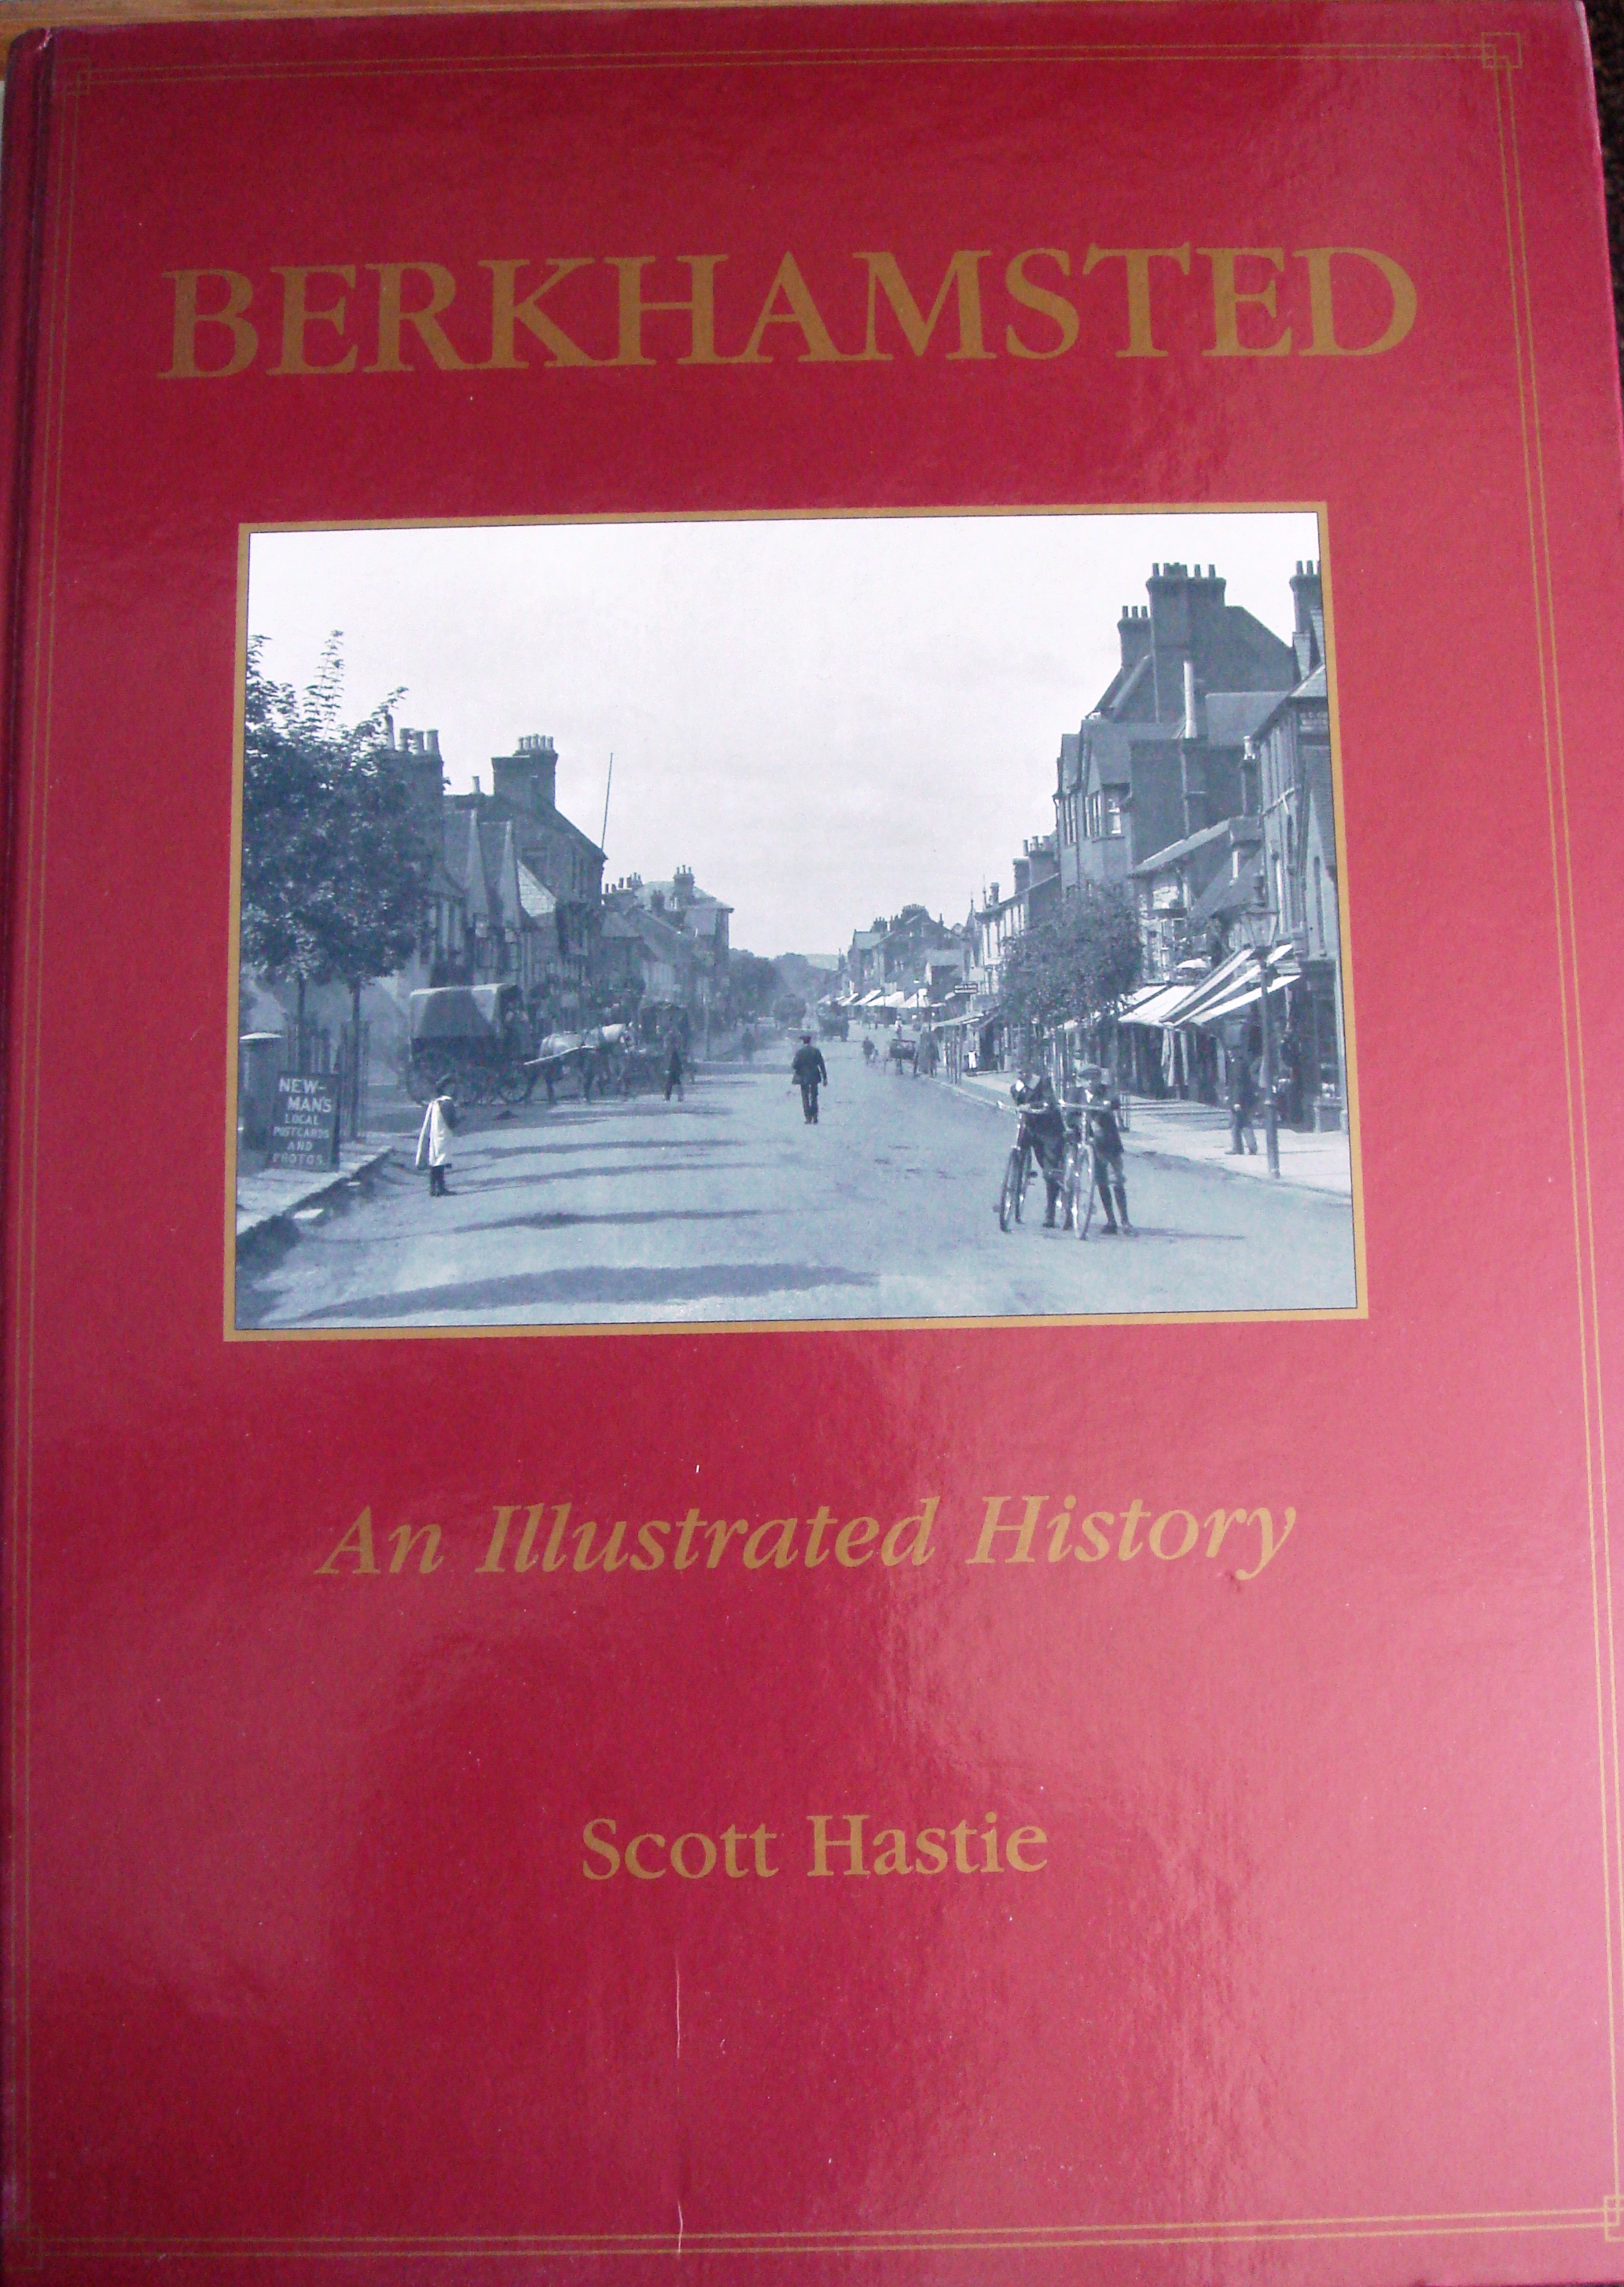 Berkhamsted: An Illustrated History